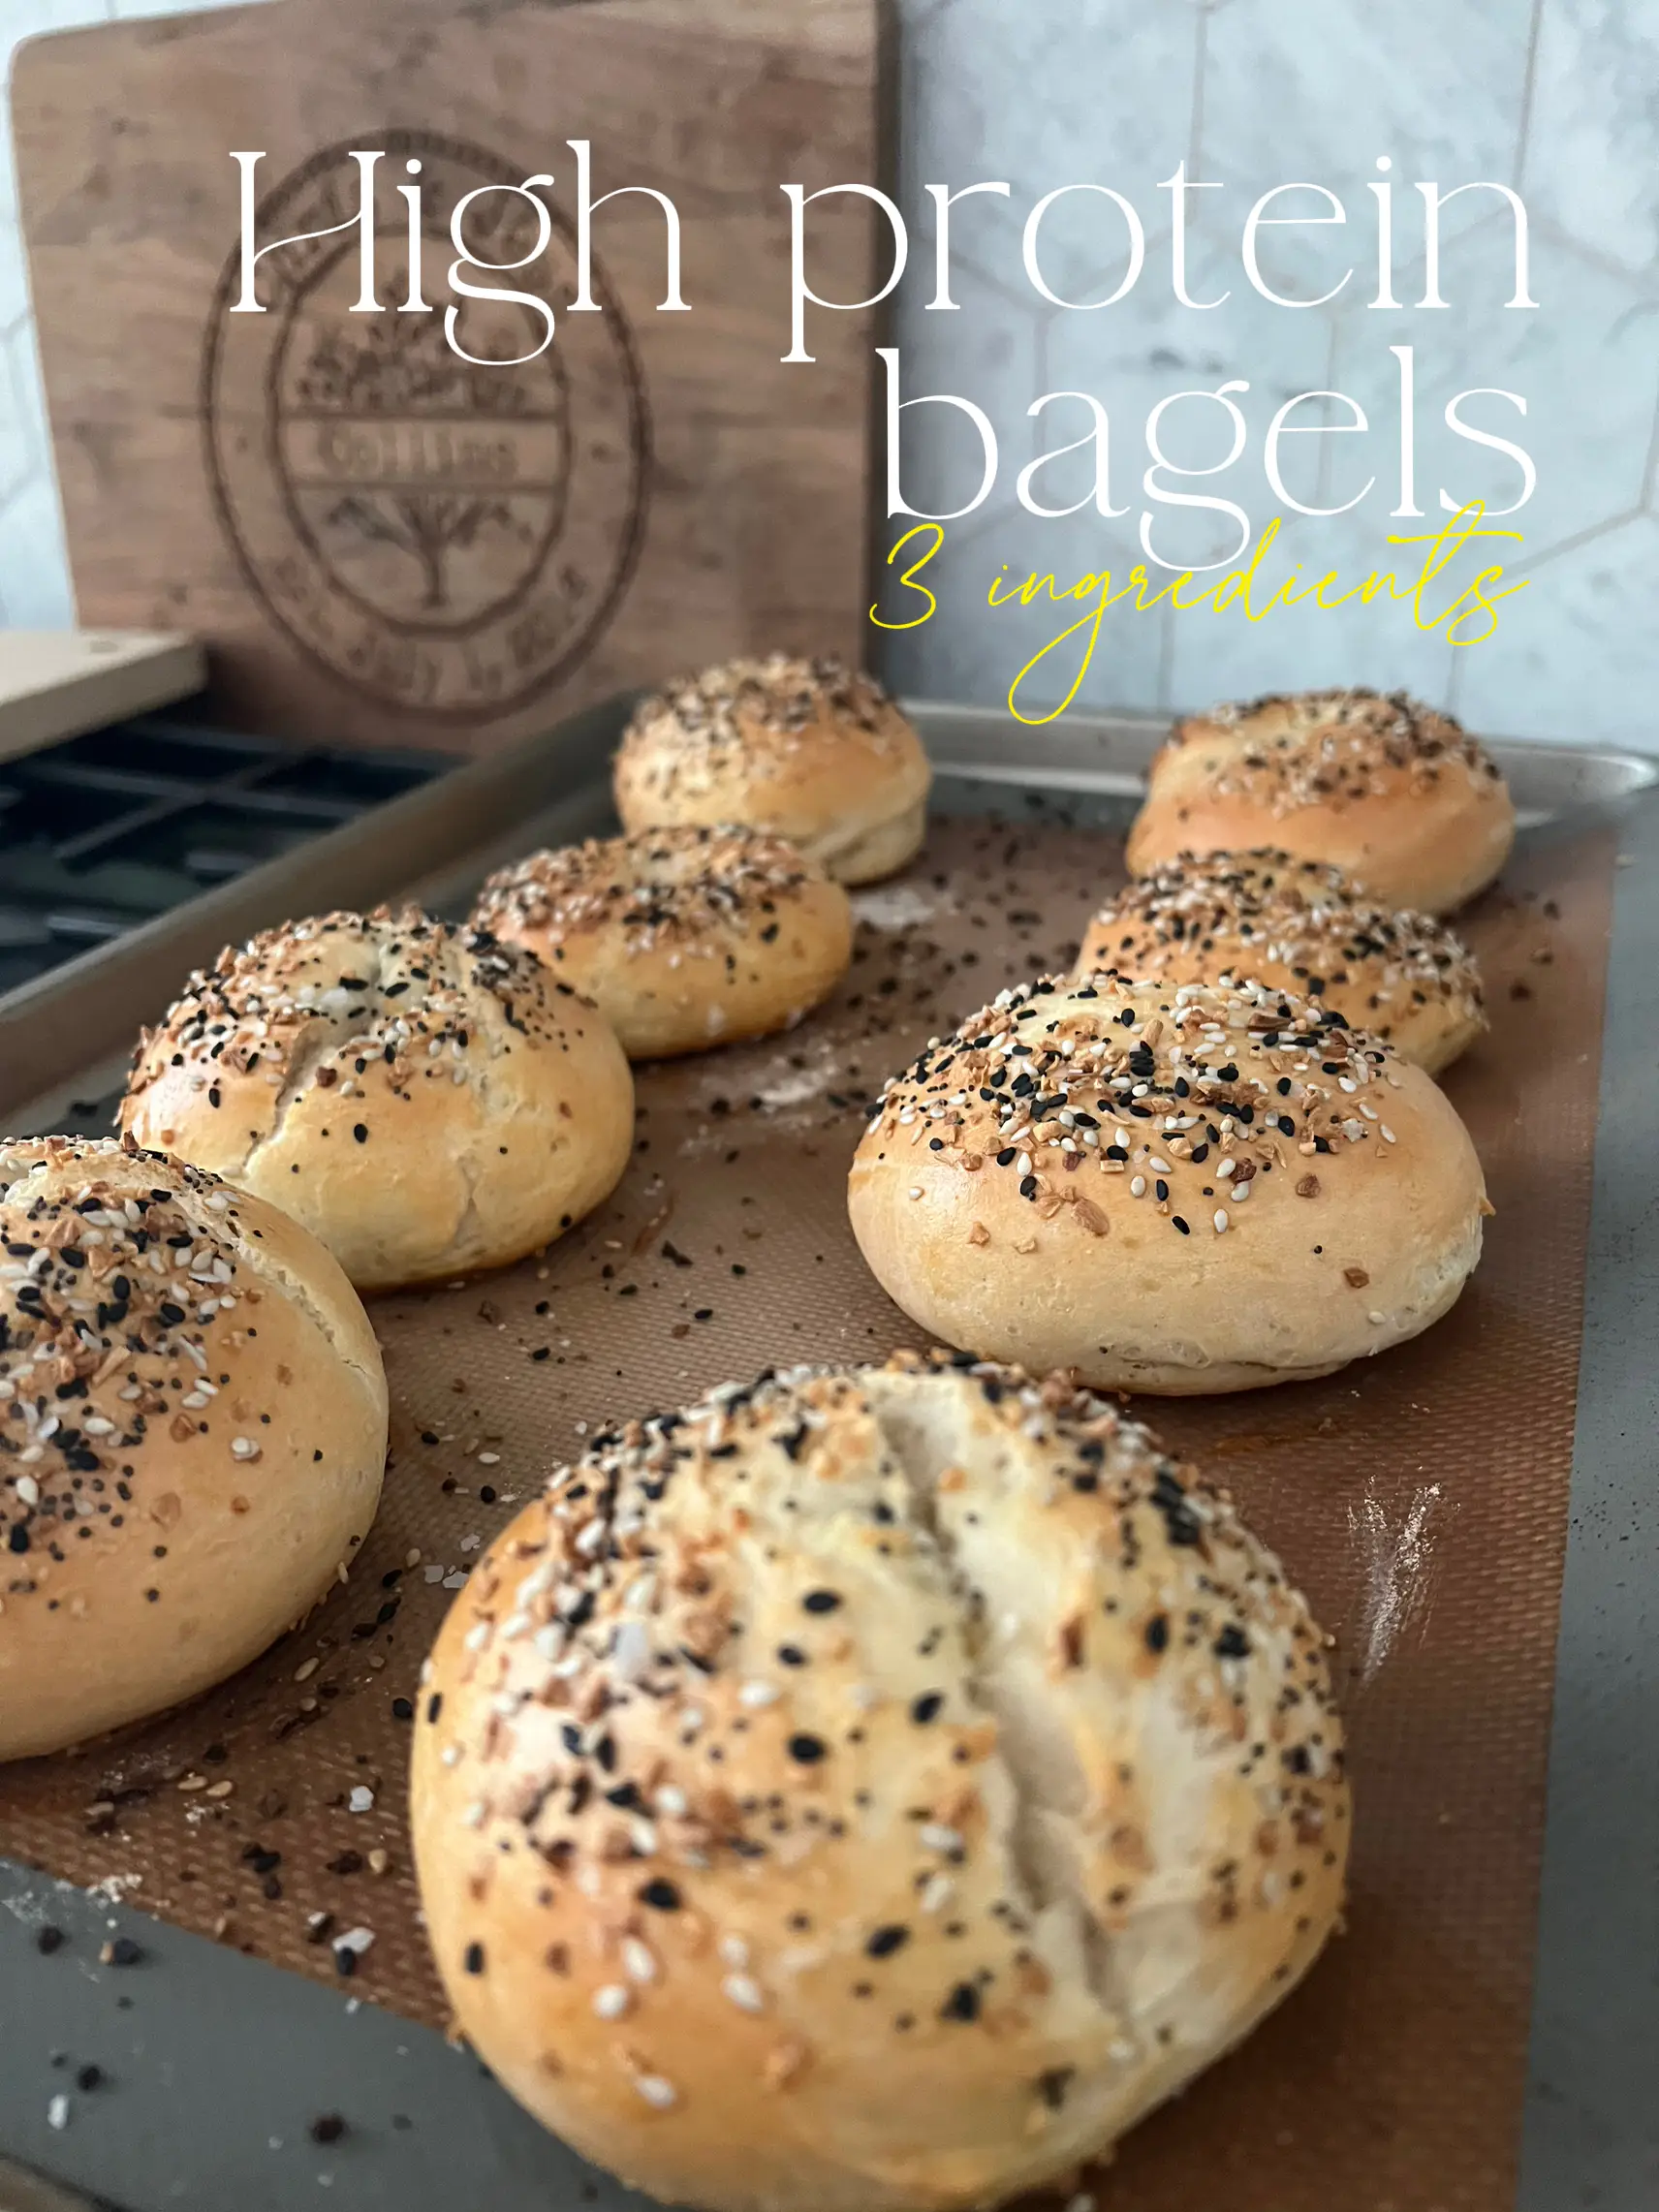 Homemade High Protein Bagels Recipe